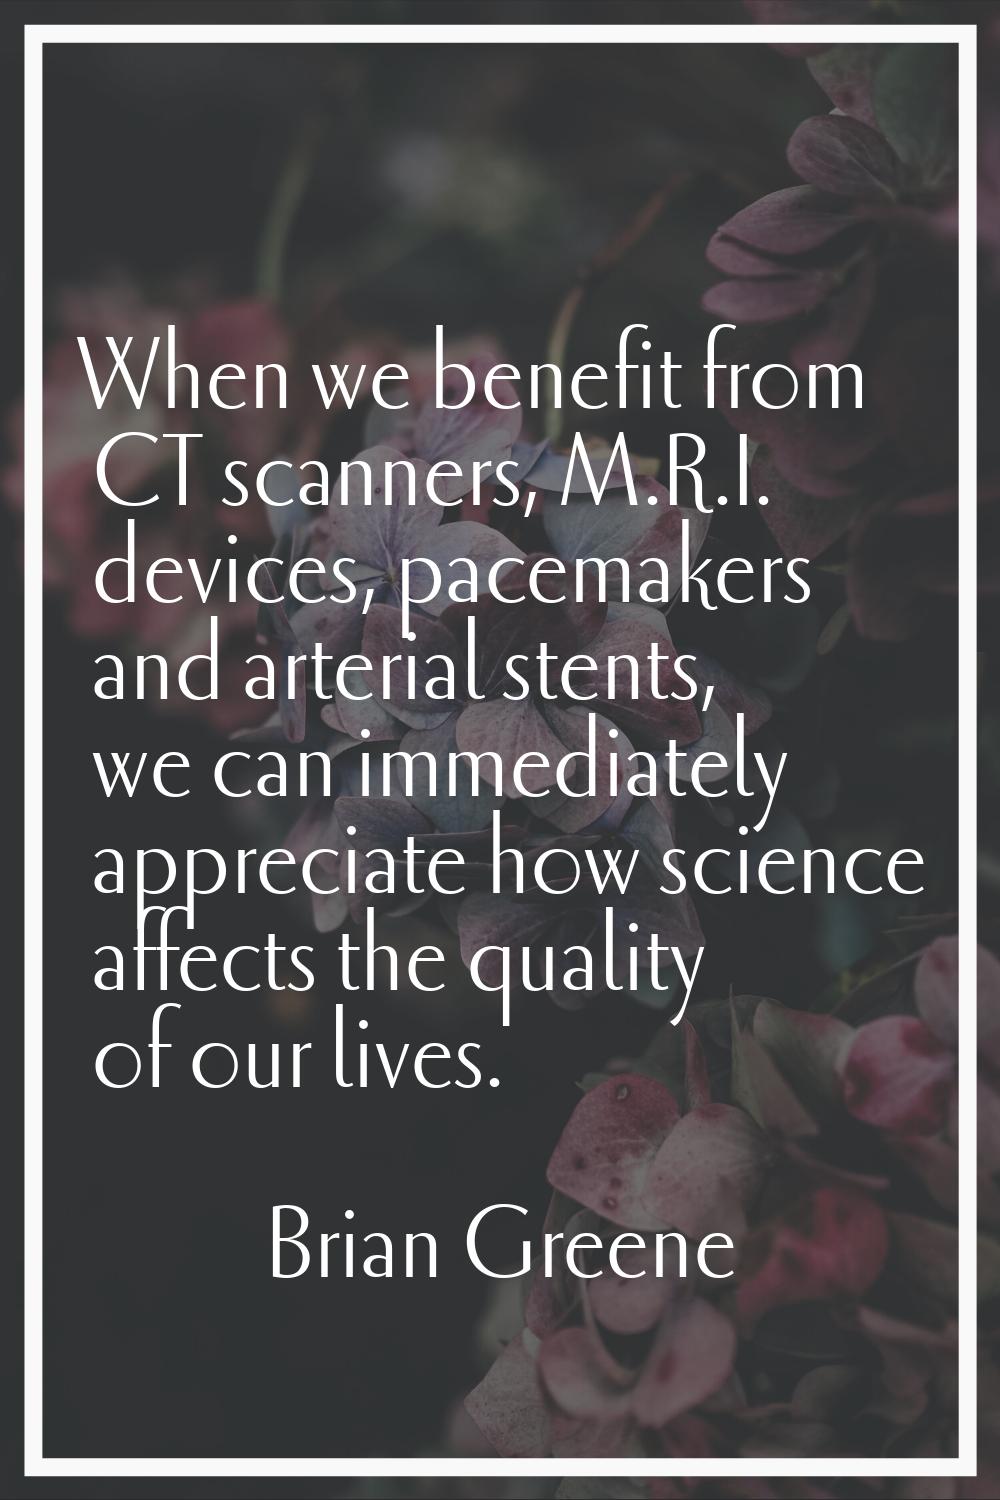 When we benefit from CT scanners, M.R.I. devices, pacemakers and arterial stents, we can immediatel